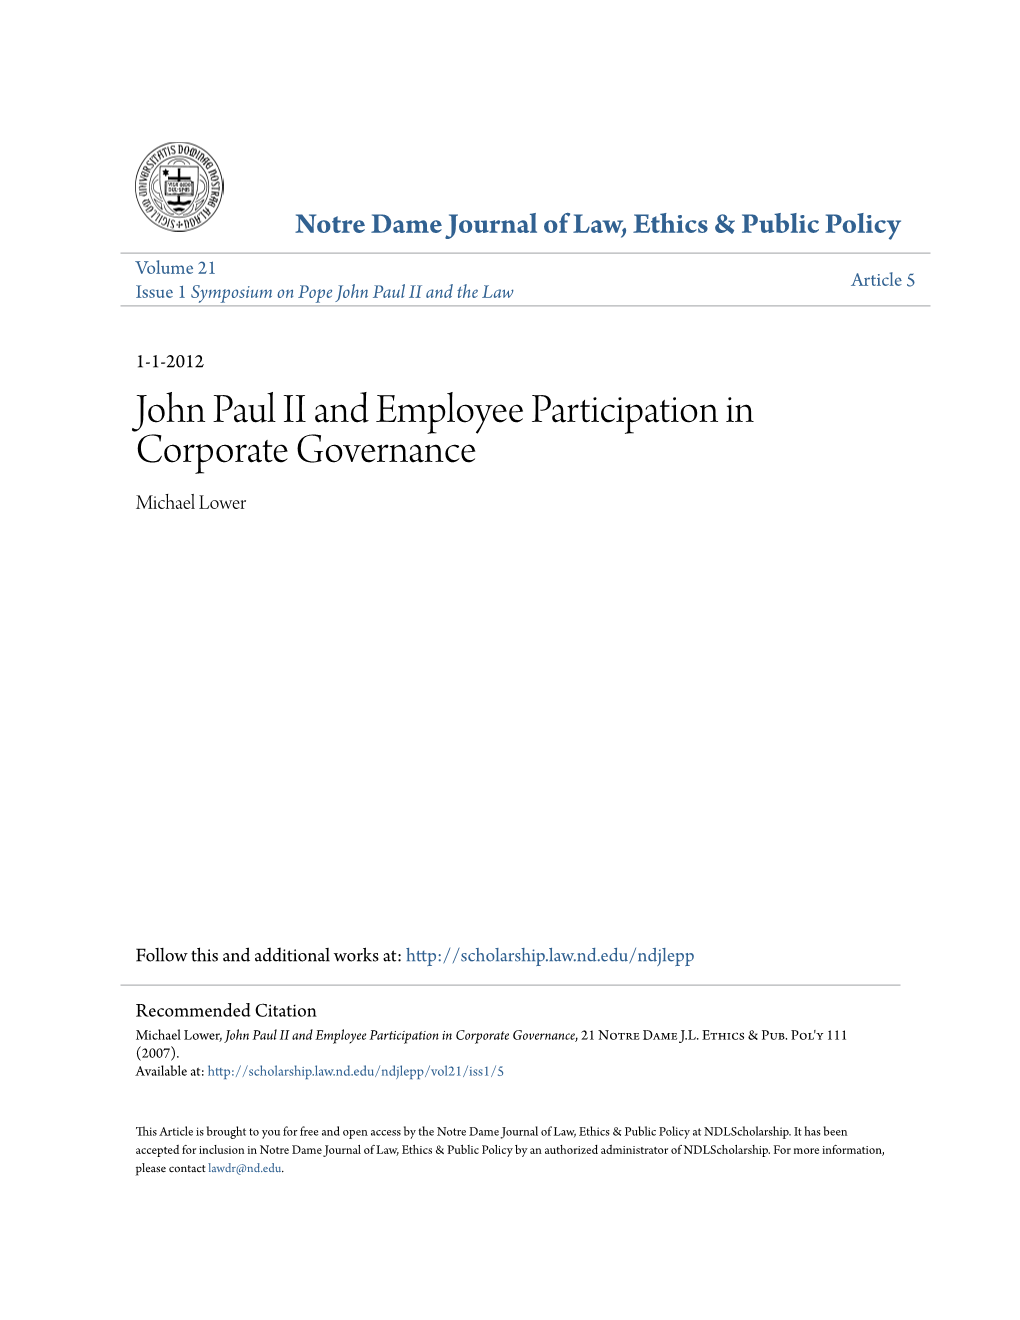 John Paul II and Employee Participation in Corporate Governance Michael Lower